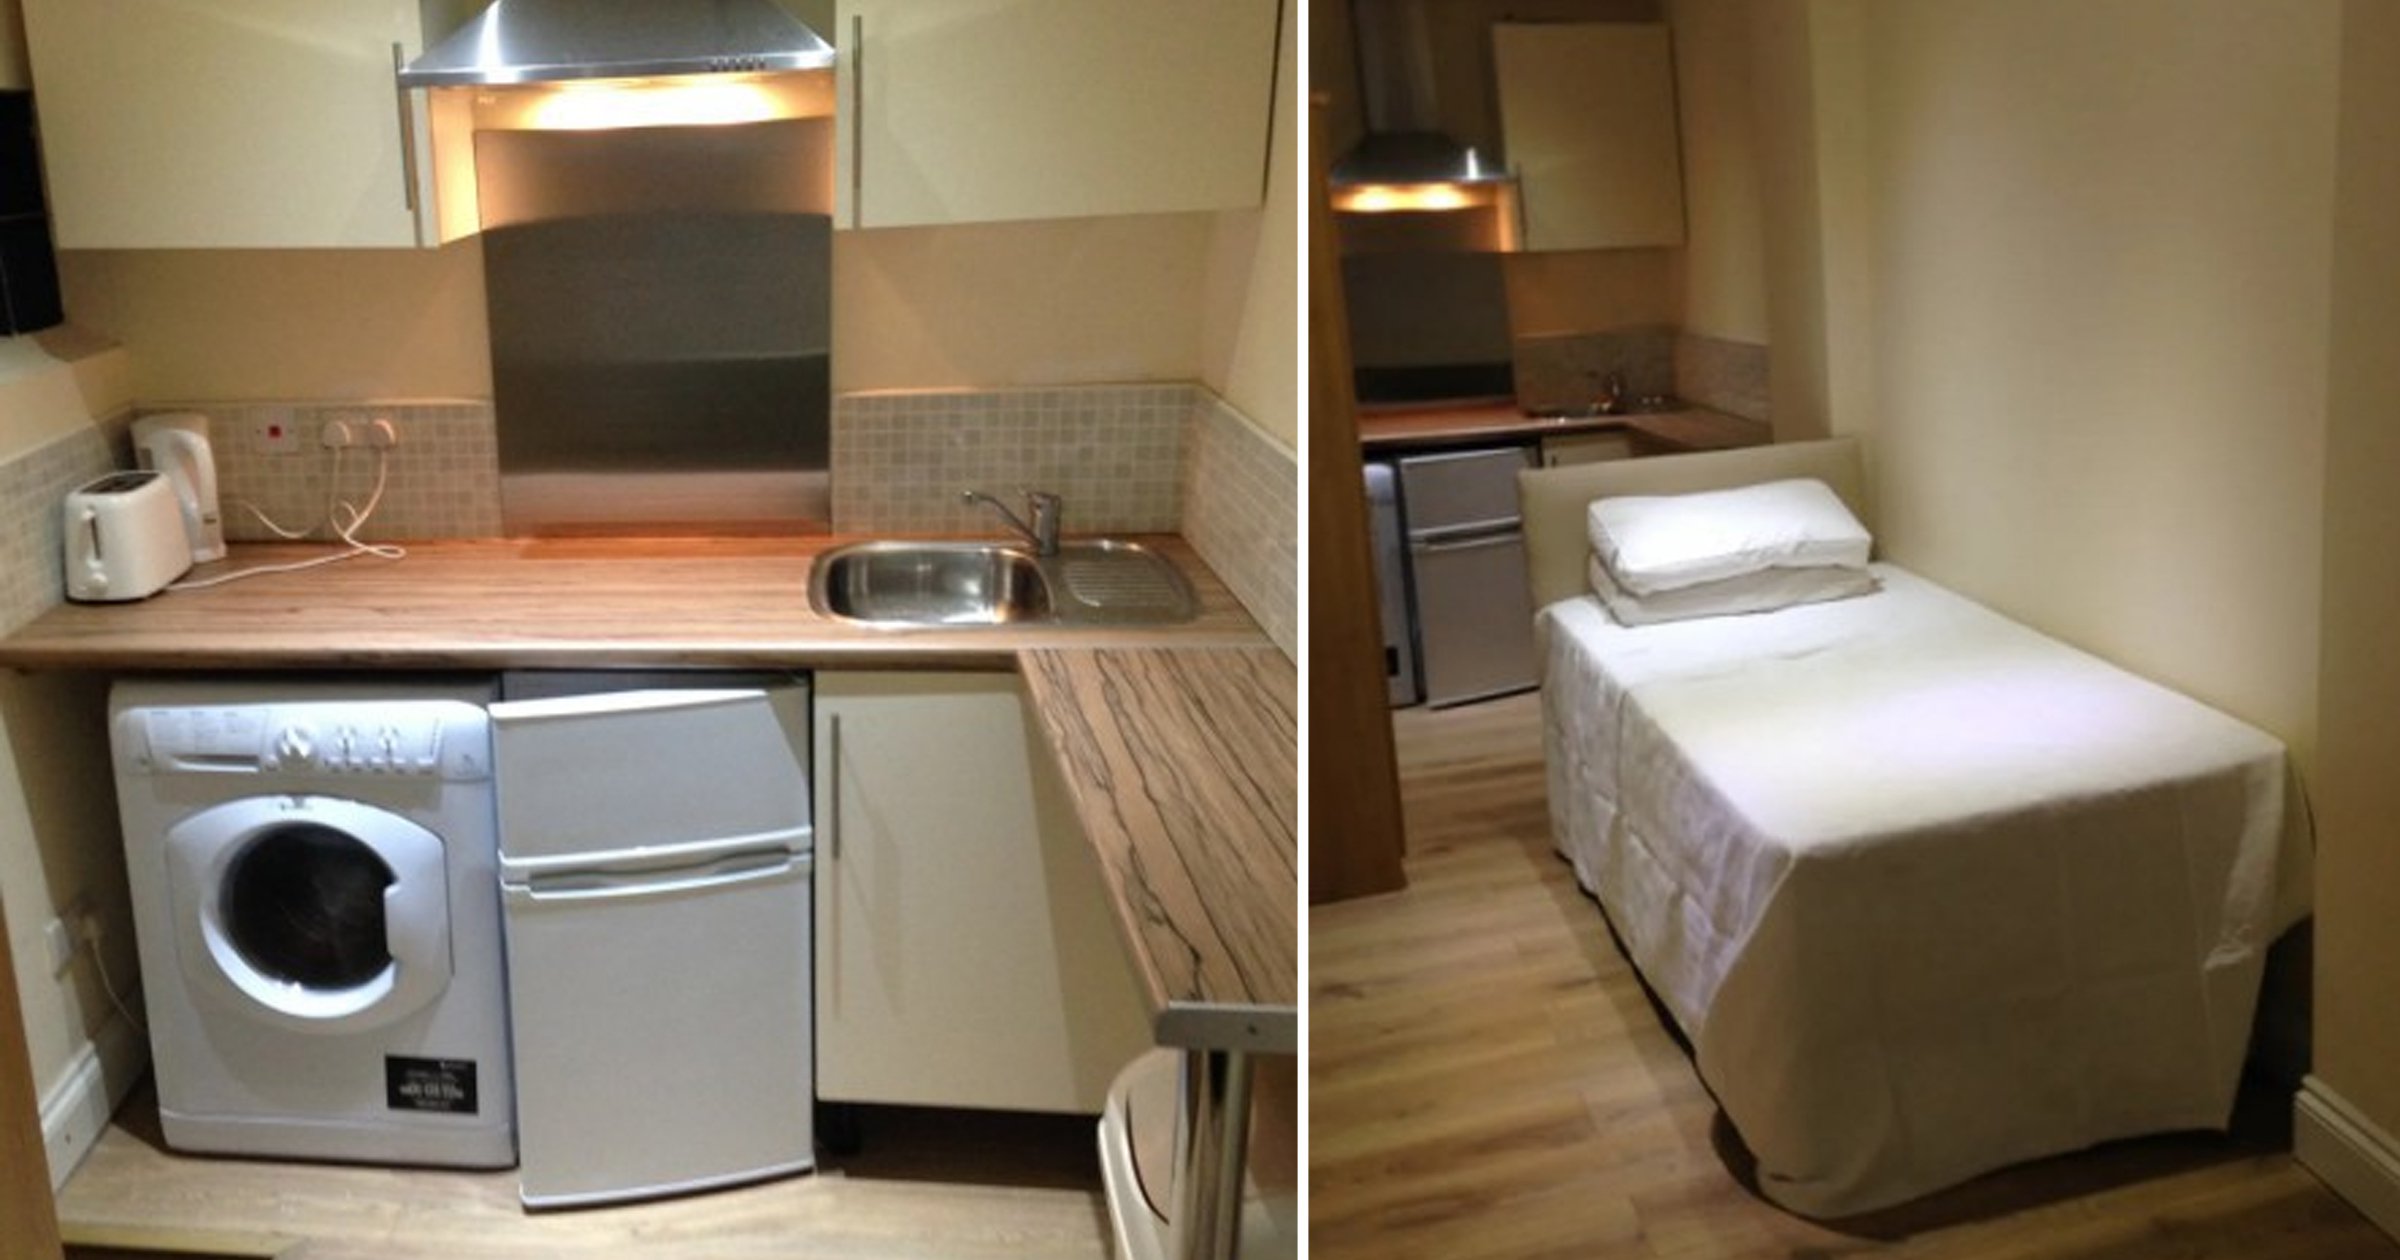 For just £875 a month, this tiny London flat with a bed in the kitchen could be yours